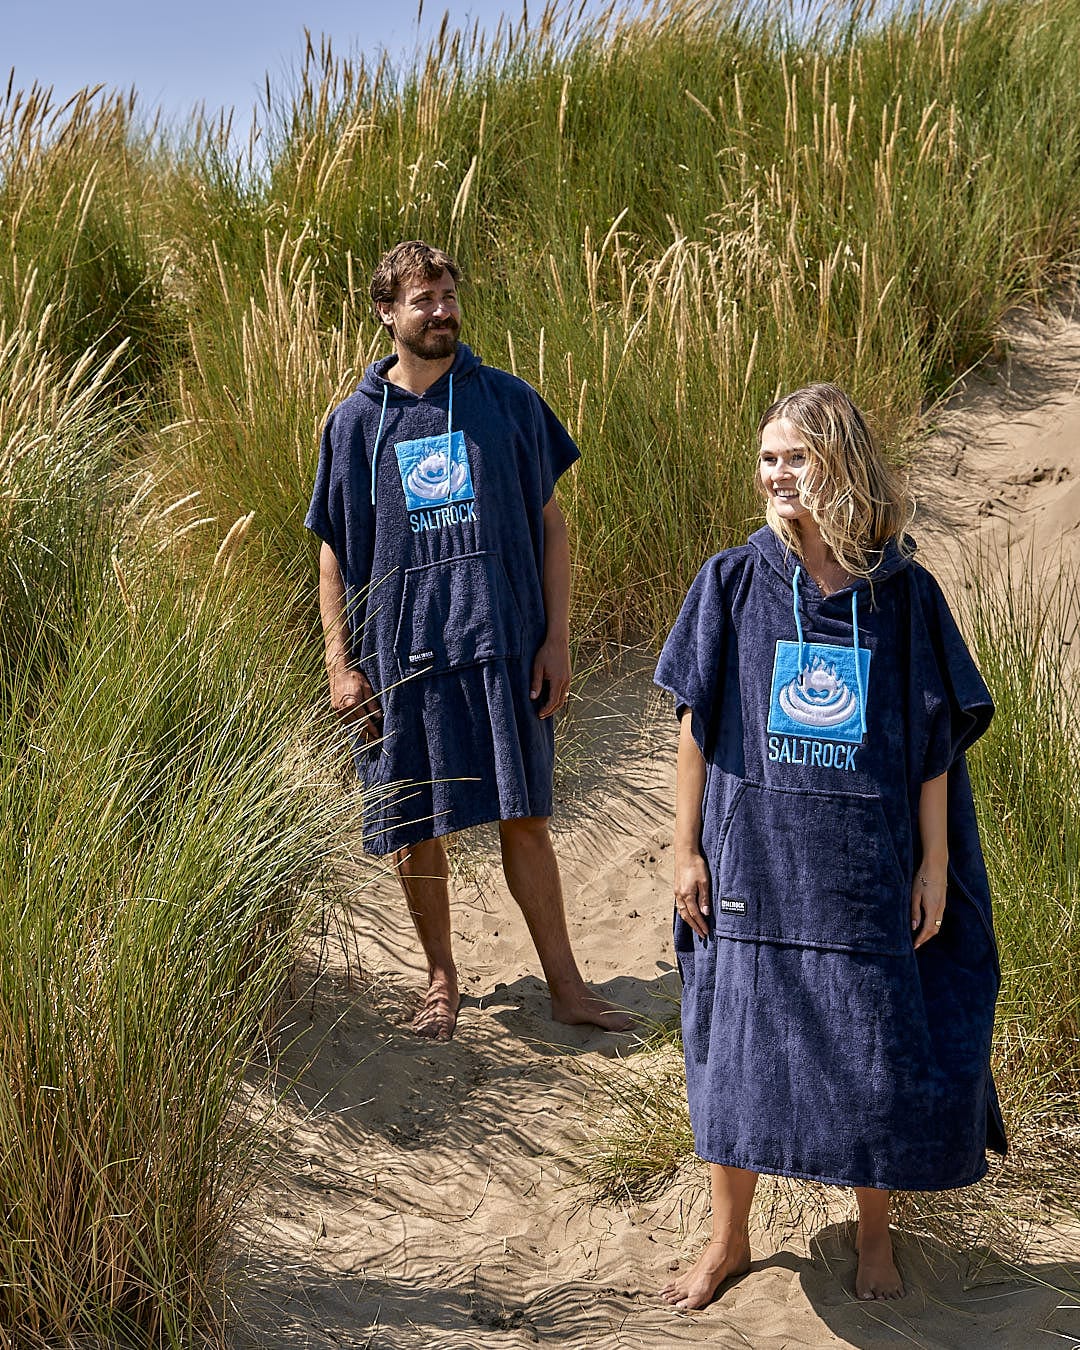 A man and a woman dressed in Saltrock ponchos on a beach.